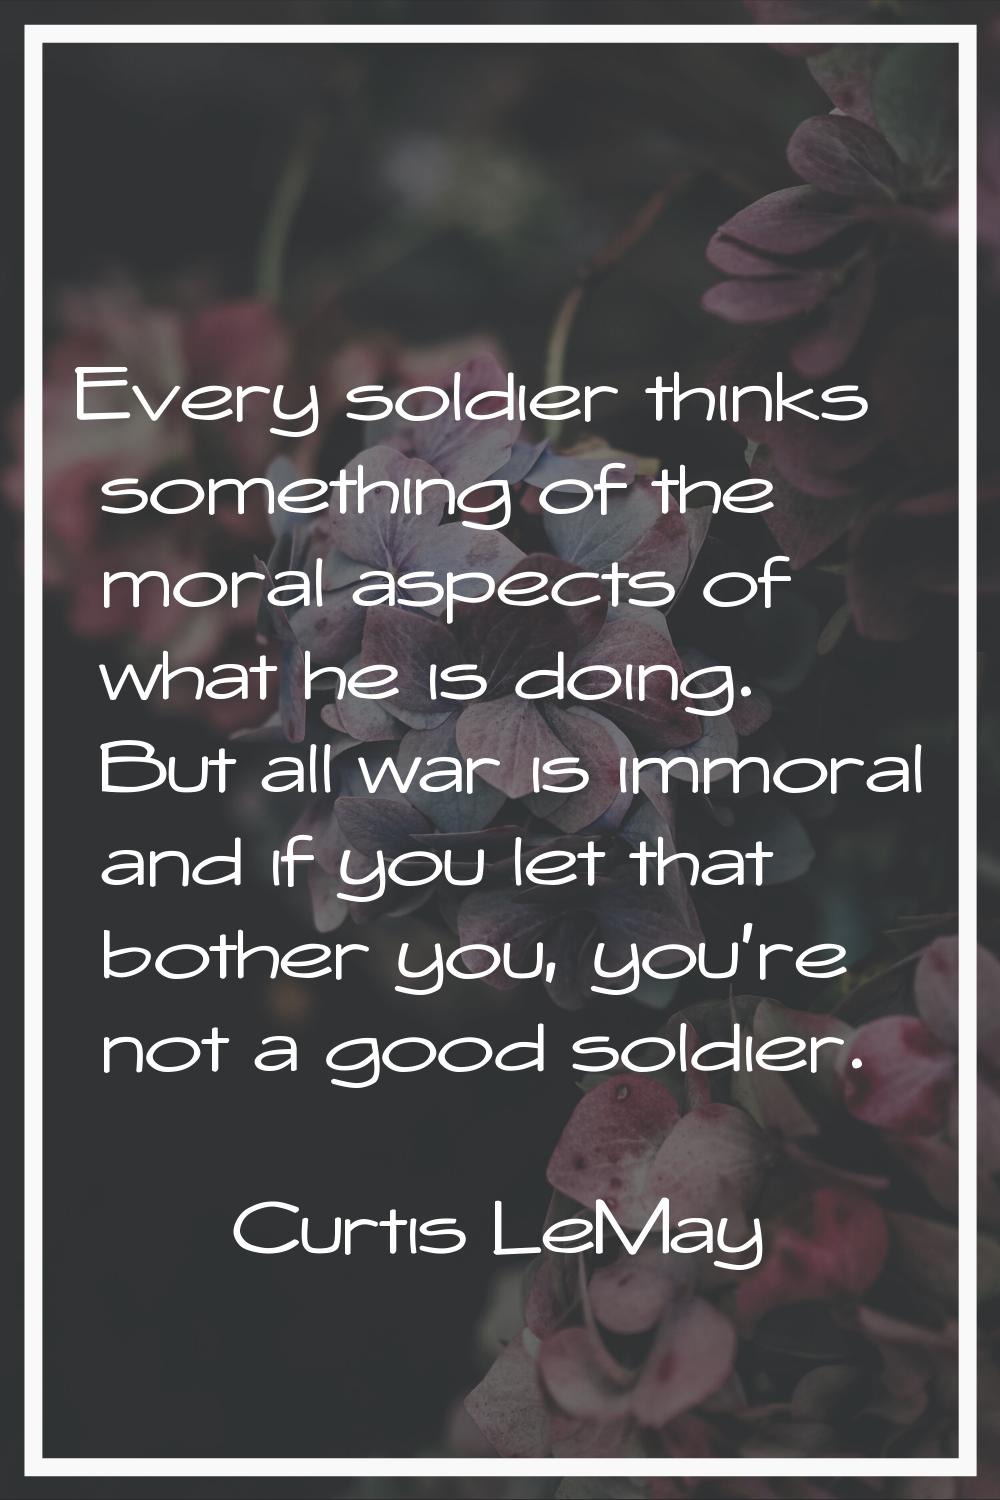 Every soldier thinks something of the moral aspects of what he is doing. But all war is immoral and